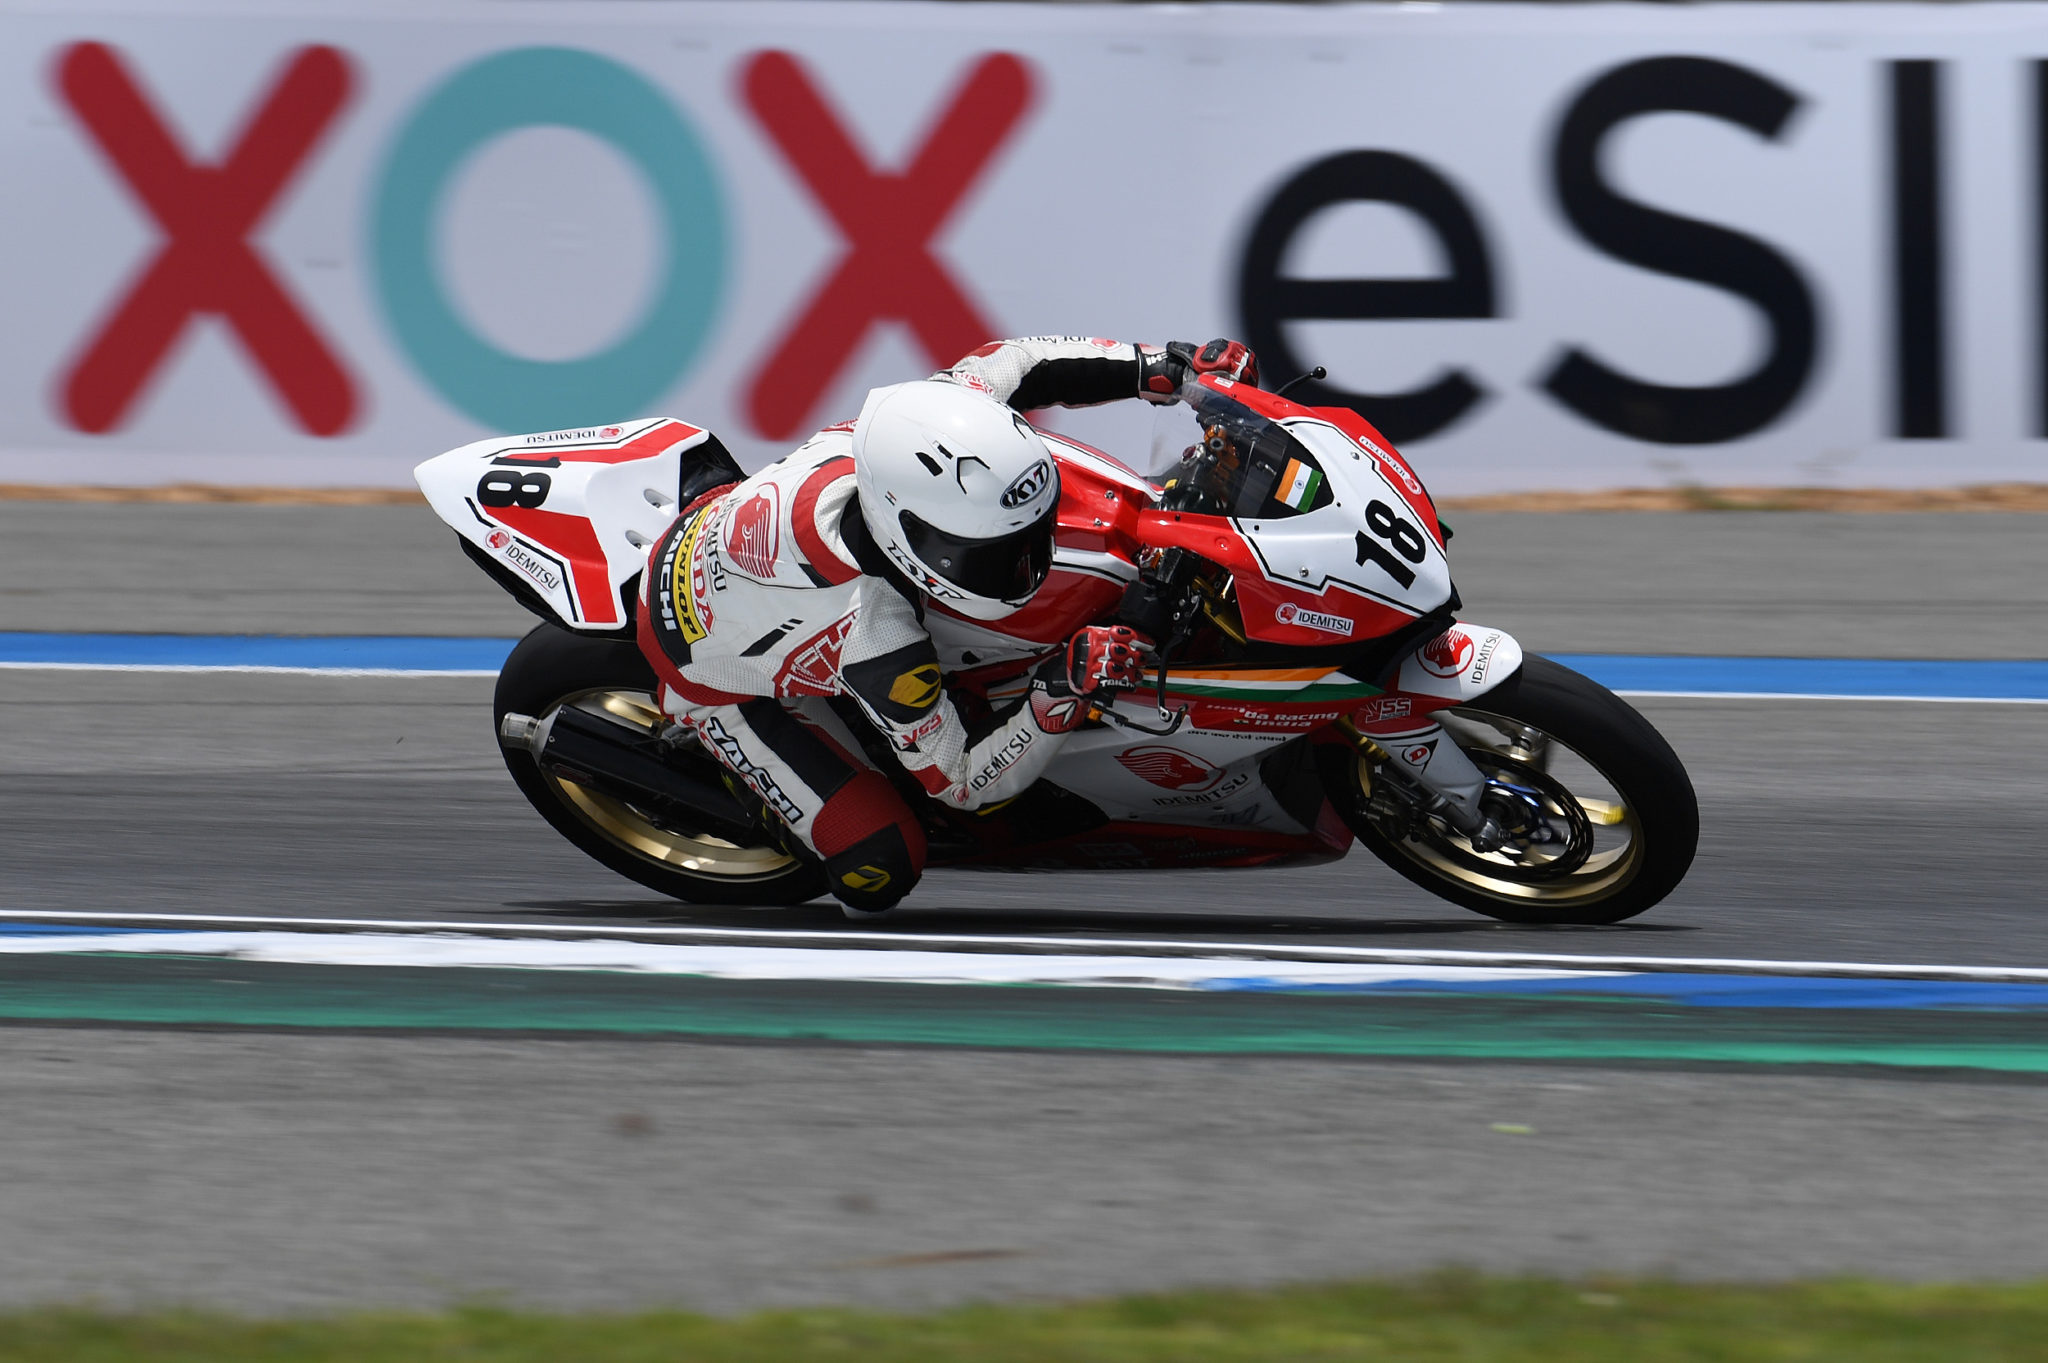 Rajiv consistent in Top 15 in today’s practice at ARRC Rd 3, Thailand decoding=